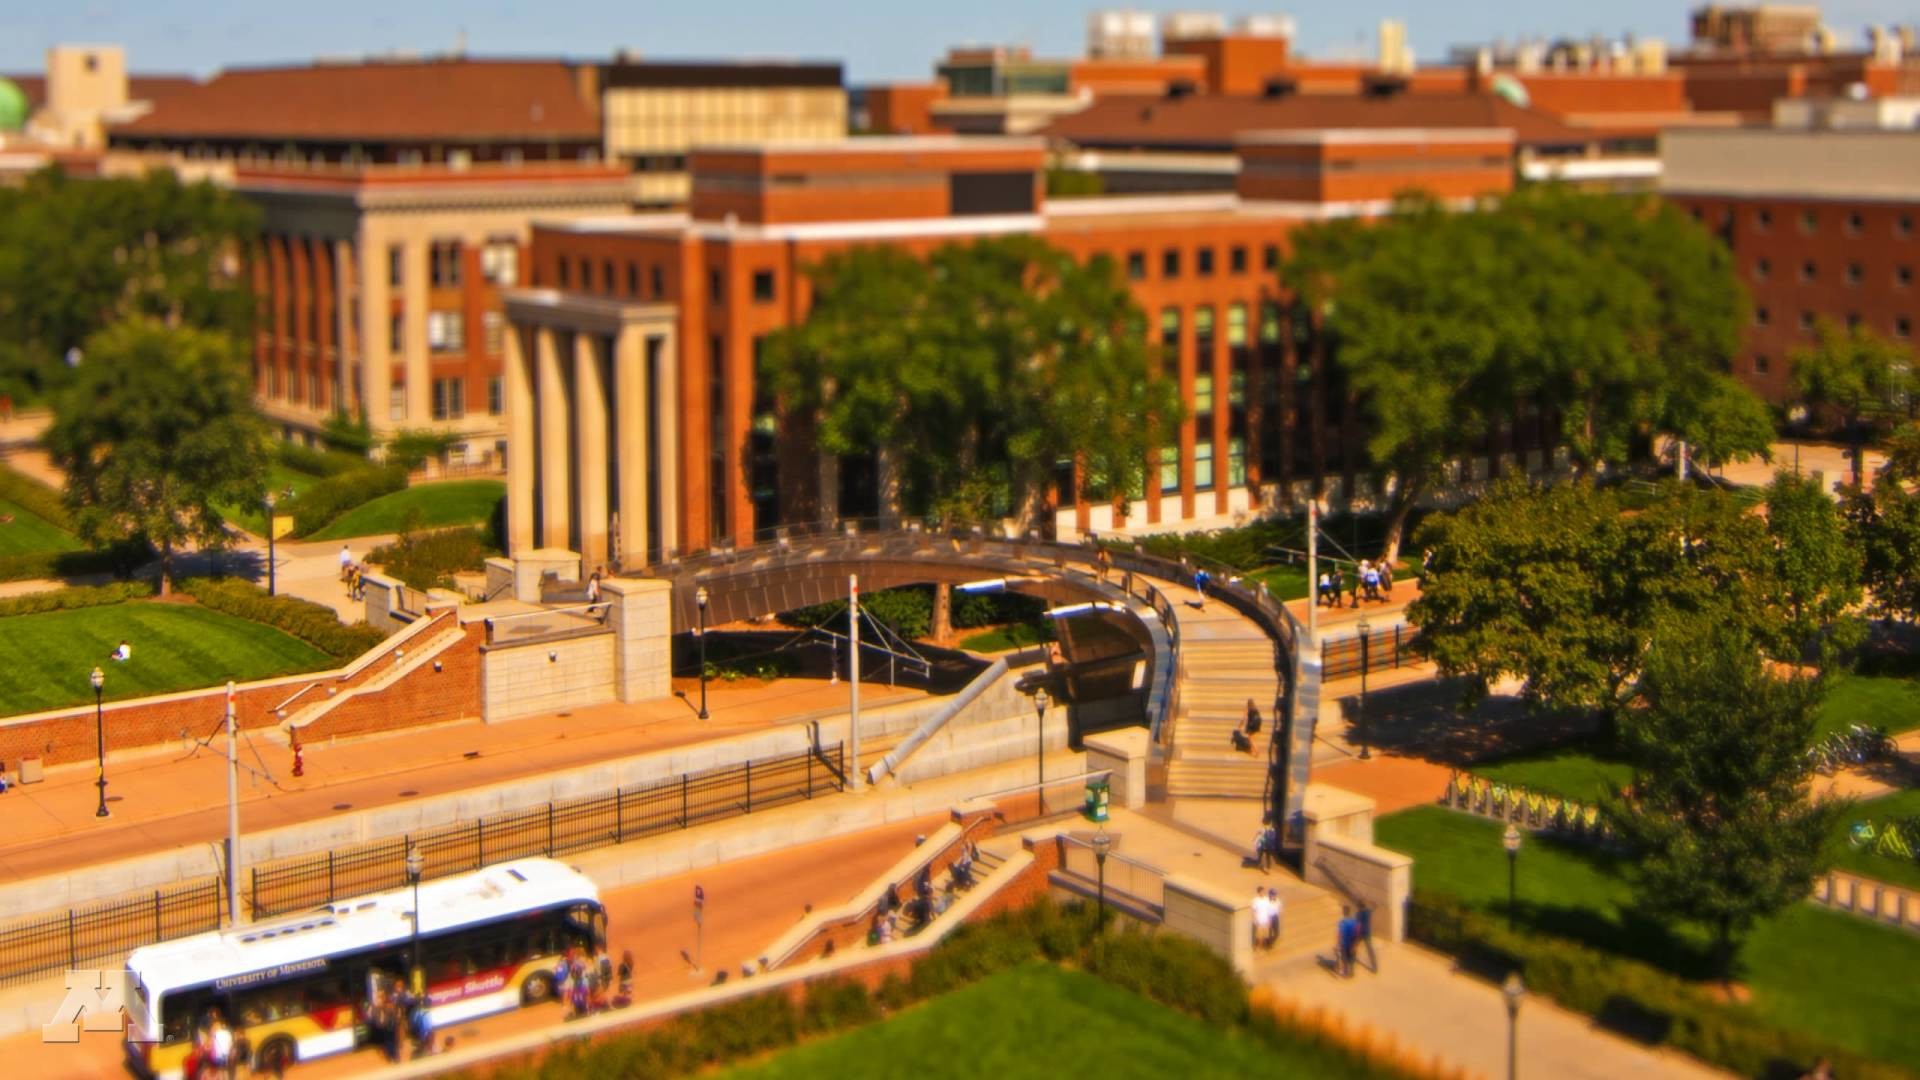 1920x1080 Day in the Life at the University of Minnesota (tilt shift time lapse)